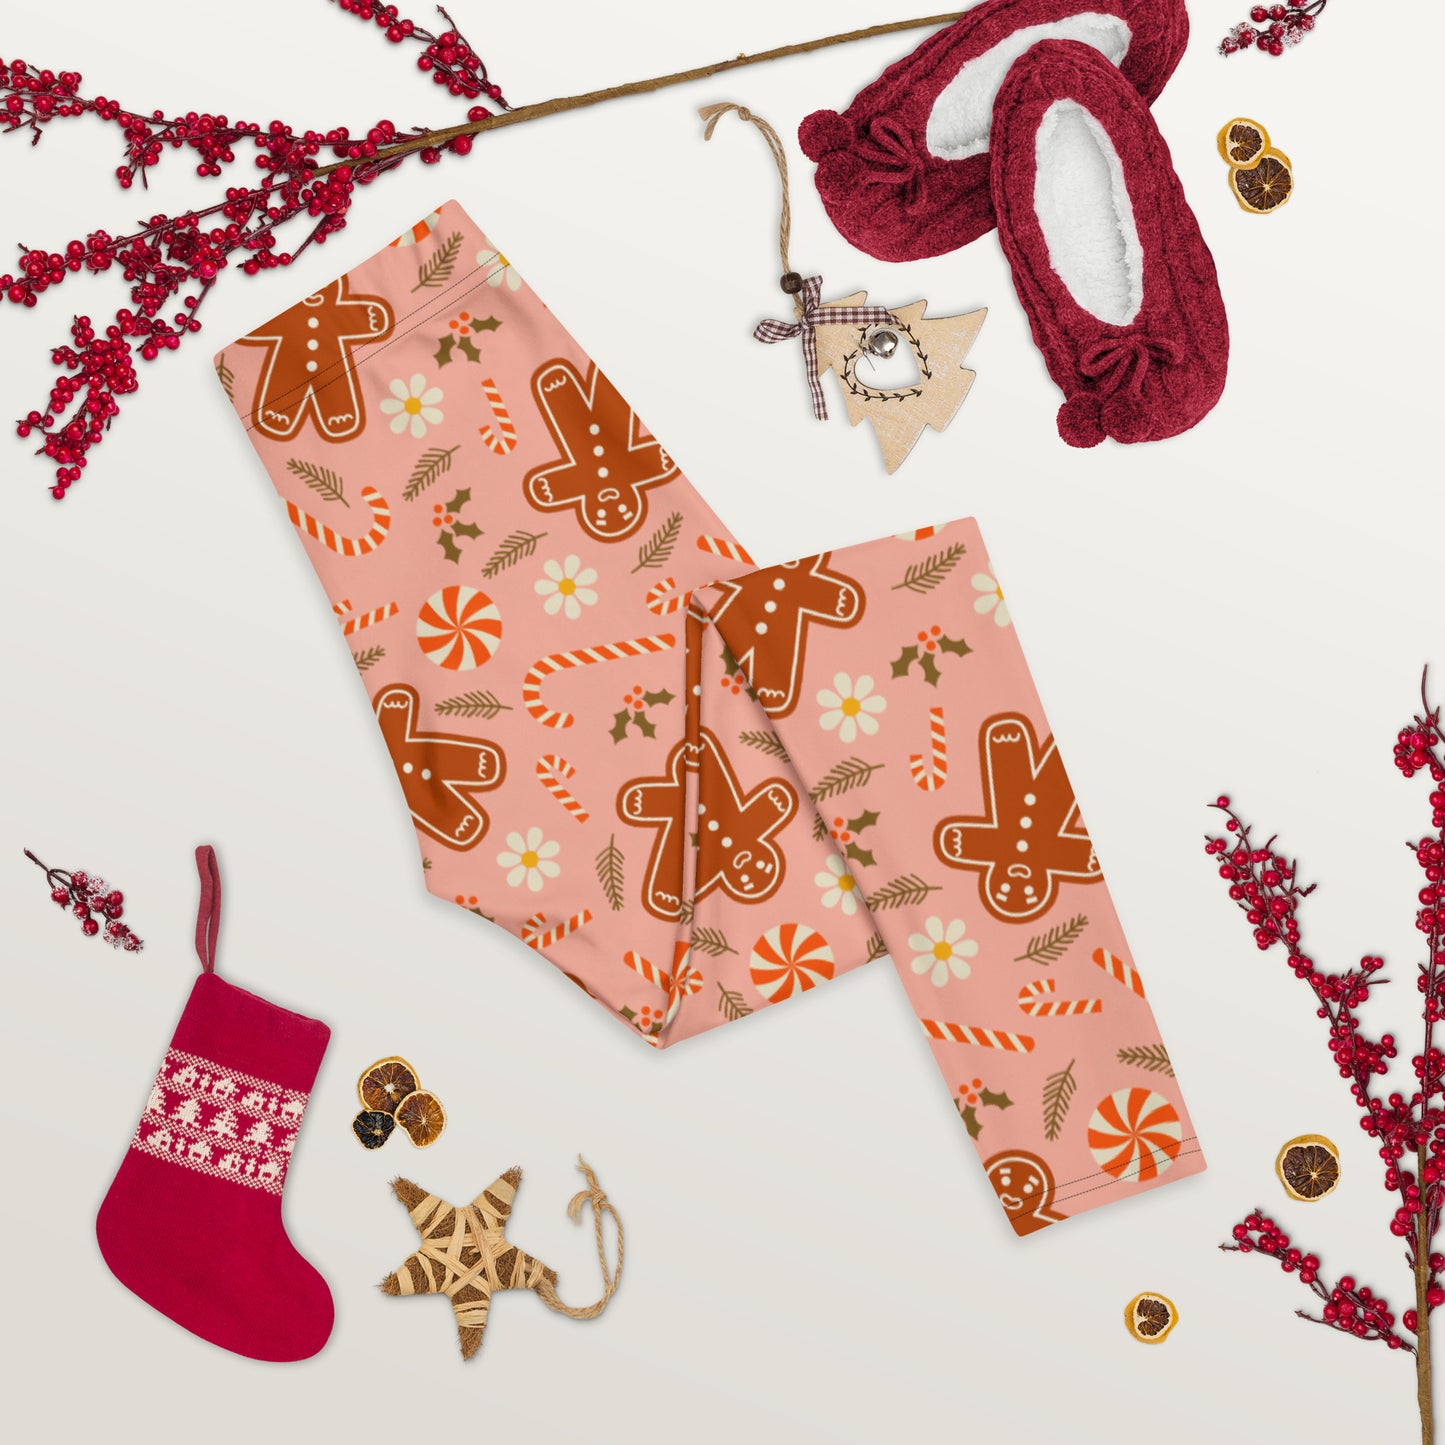 Gingerbread Man Leggings Women, Pink Candy Cane Christmas Xmas Holiday Graphic Printed Yoga Running Tights